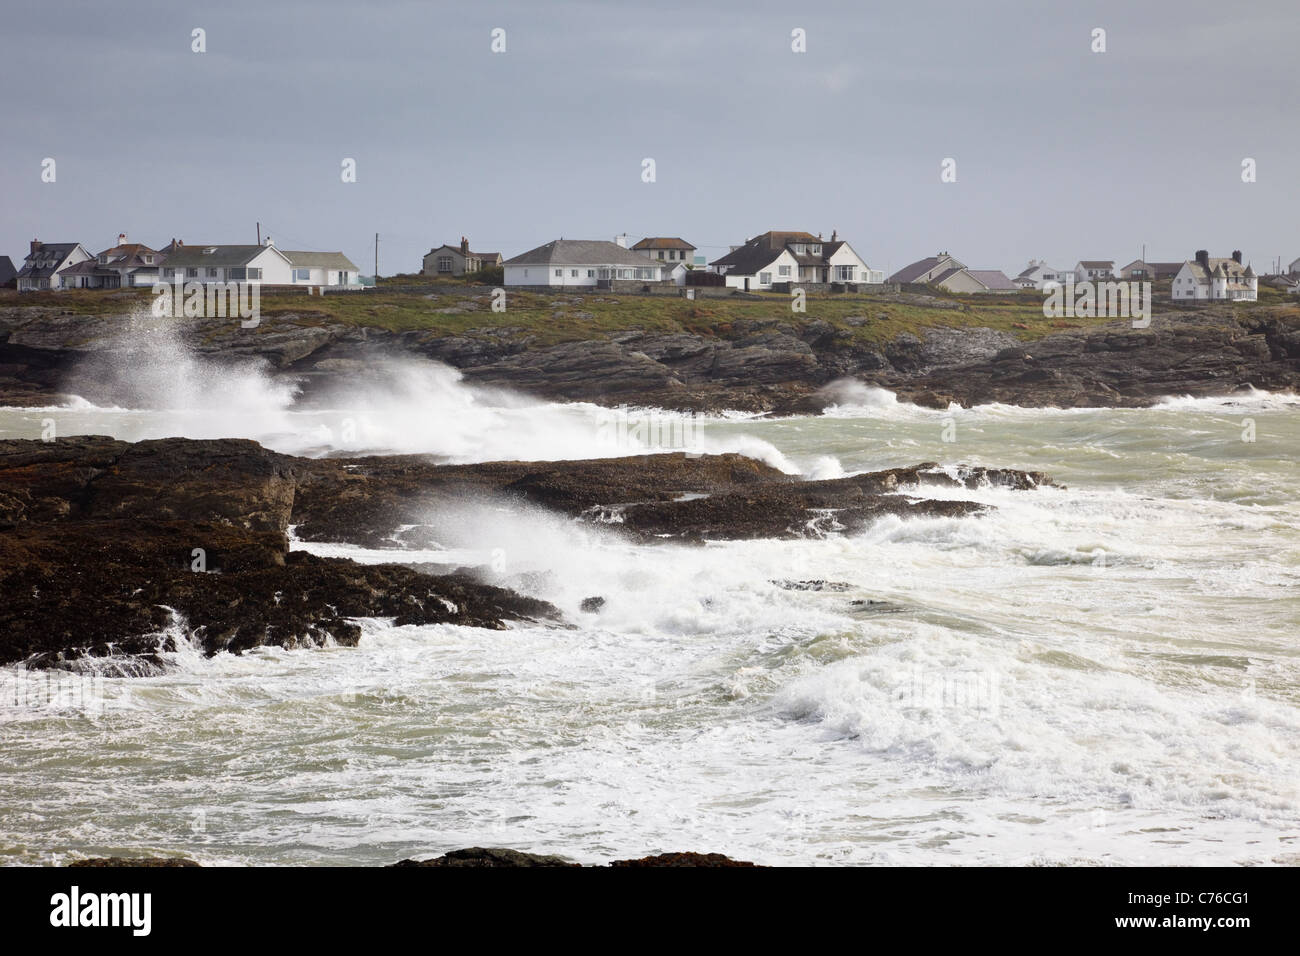 Trearddur Bay, Anglesey, North Wales, UK. View across rough stormy sea with waves crashing on rocks on exposed west coast Stock Photo